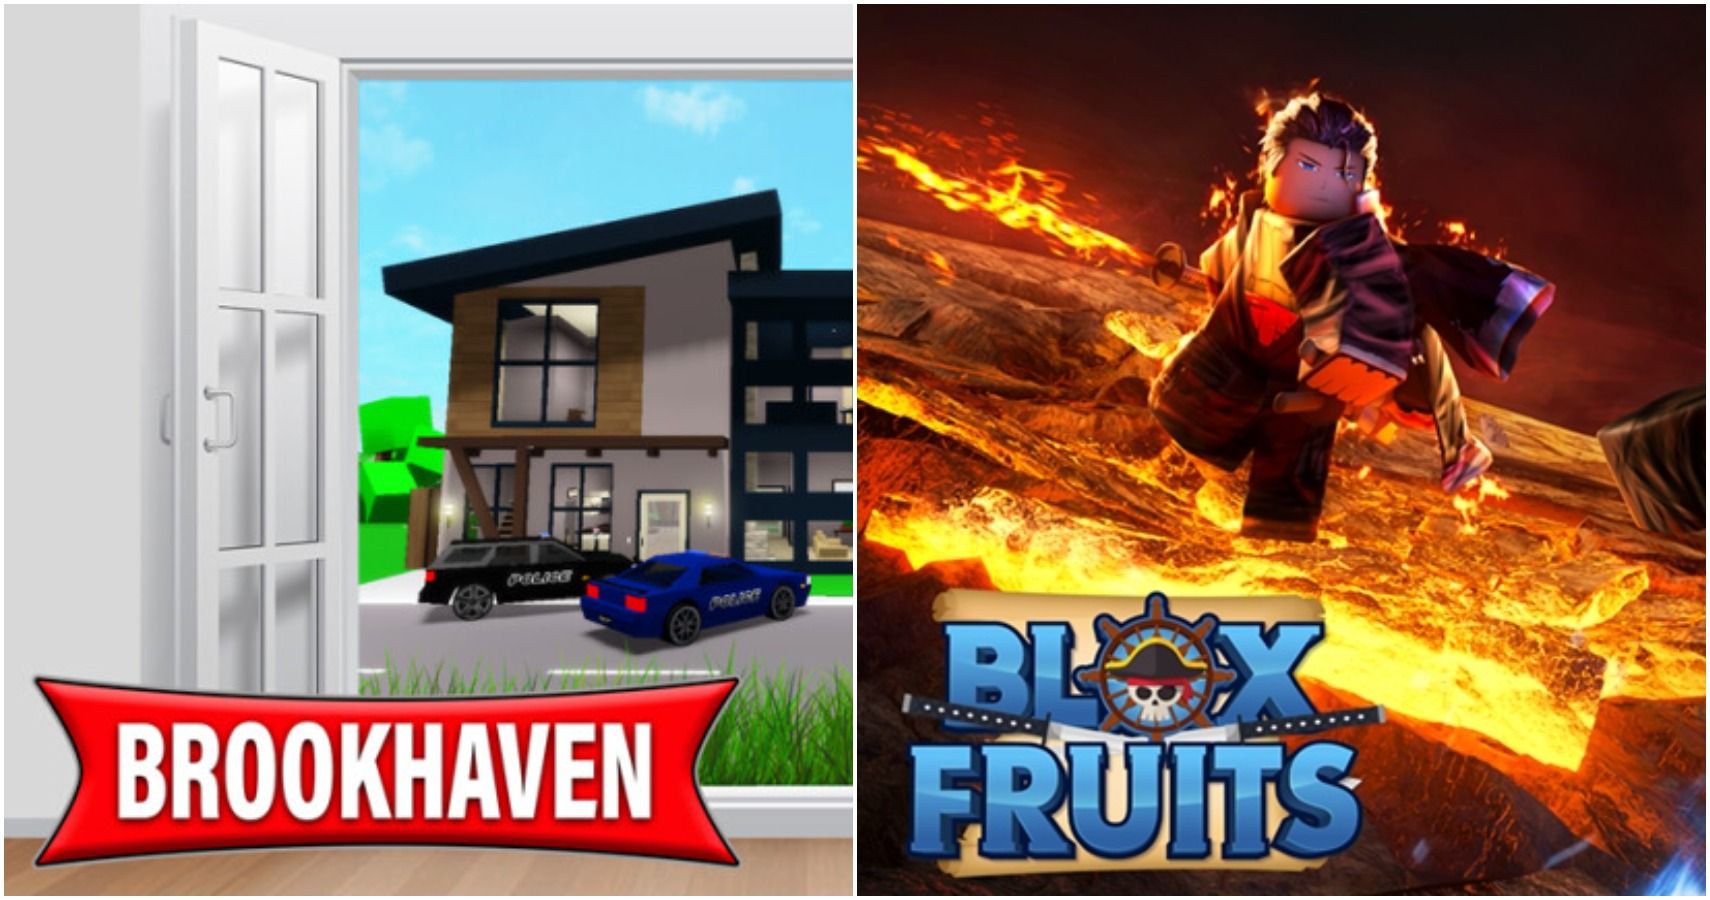 Roblox Promo Codes - Free Robux Codes For Blox Fruits, Shindo